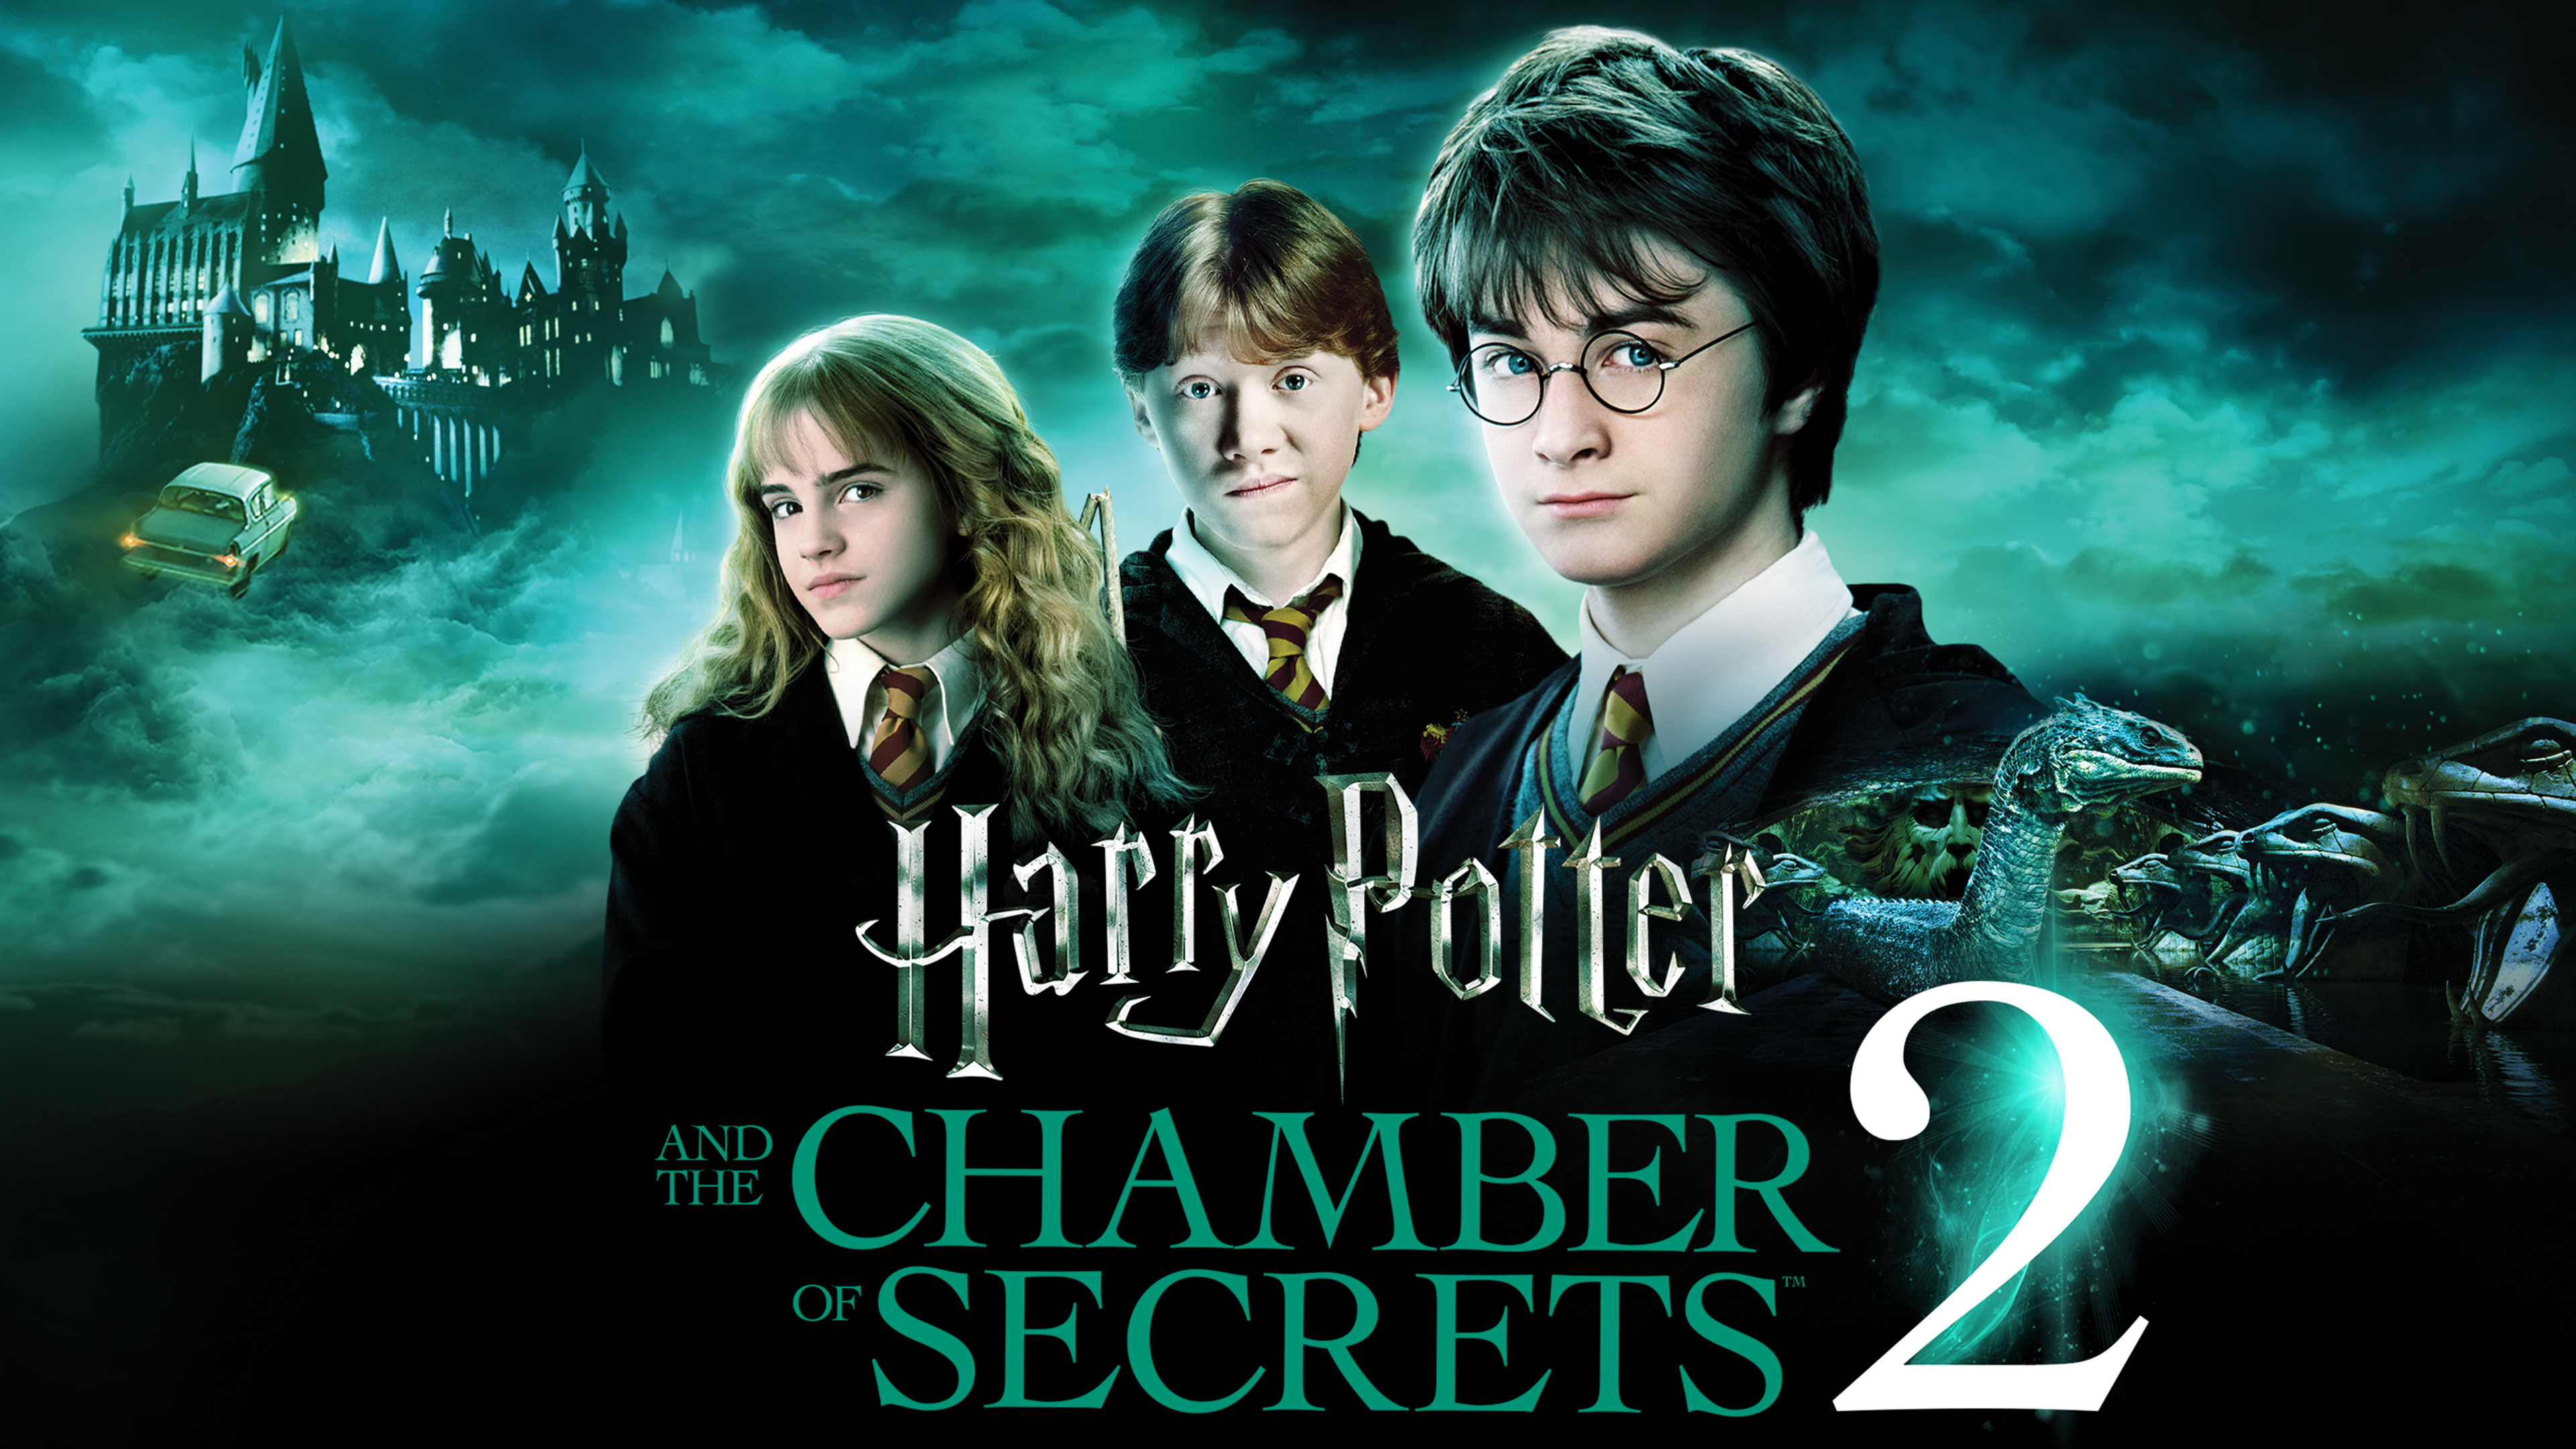 Harry Potter and the Chamber of Secrets (2002) (HBO)